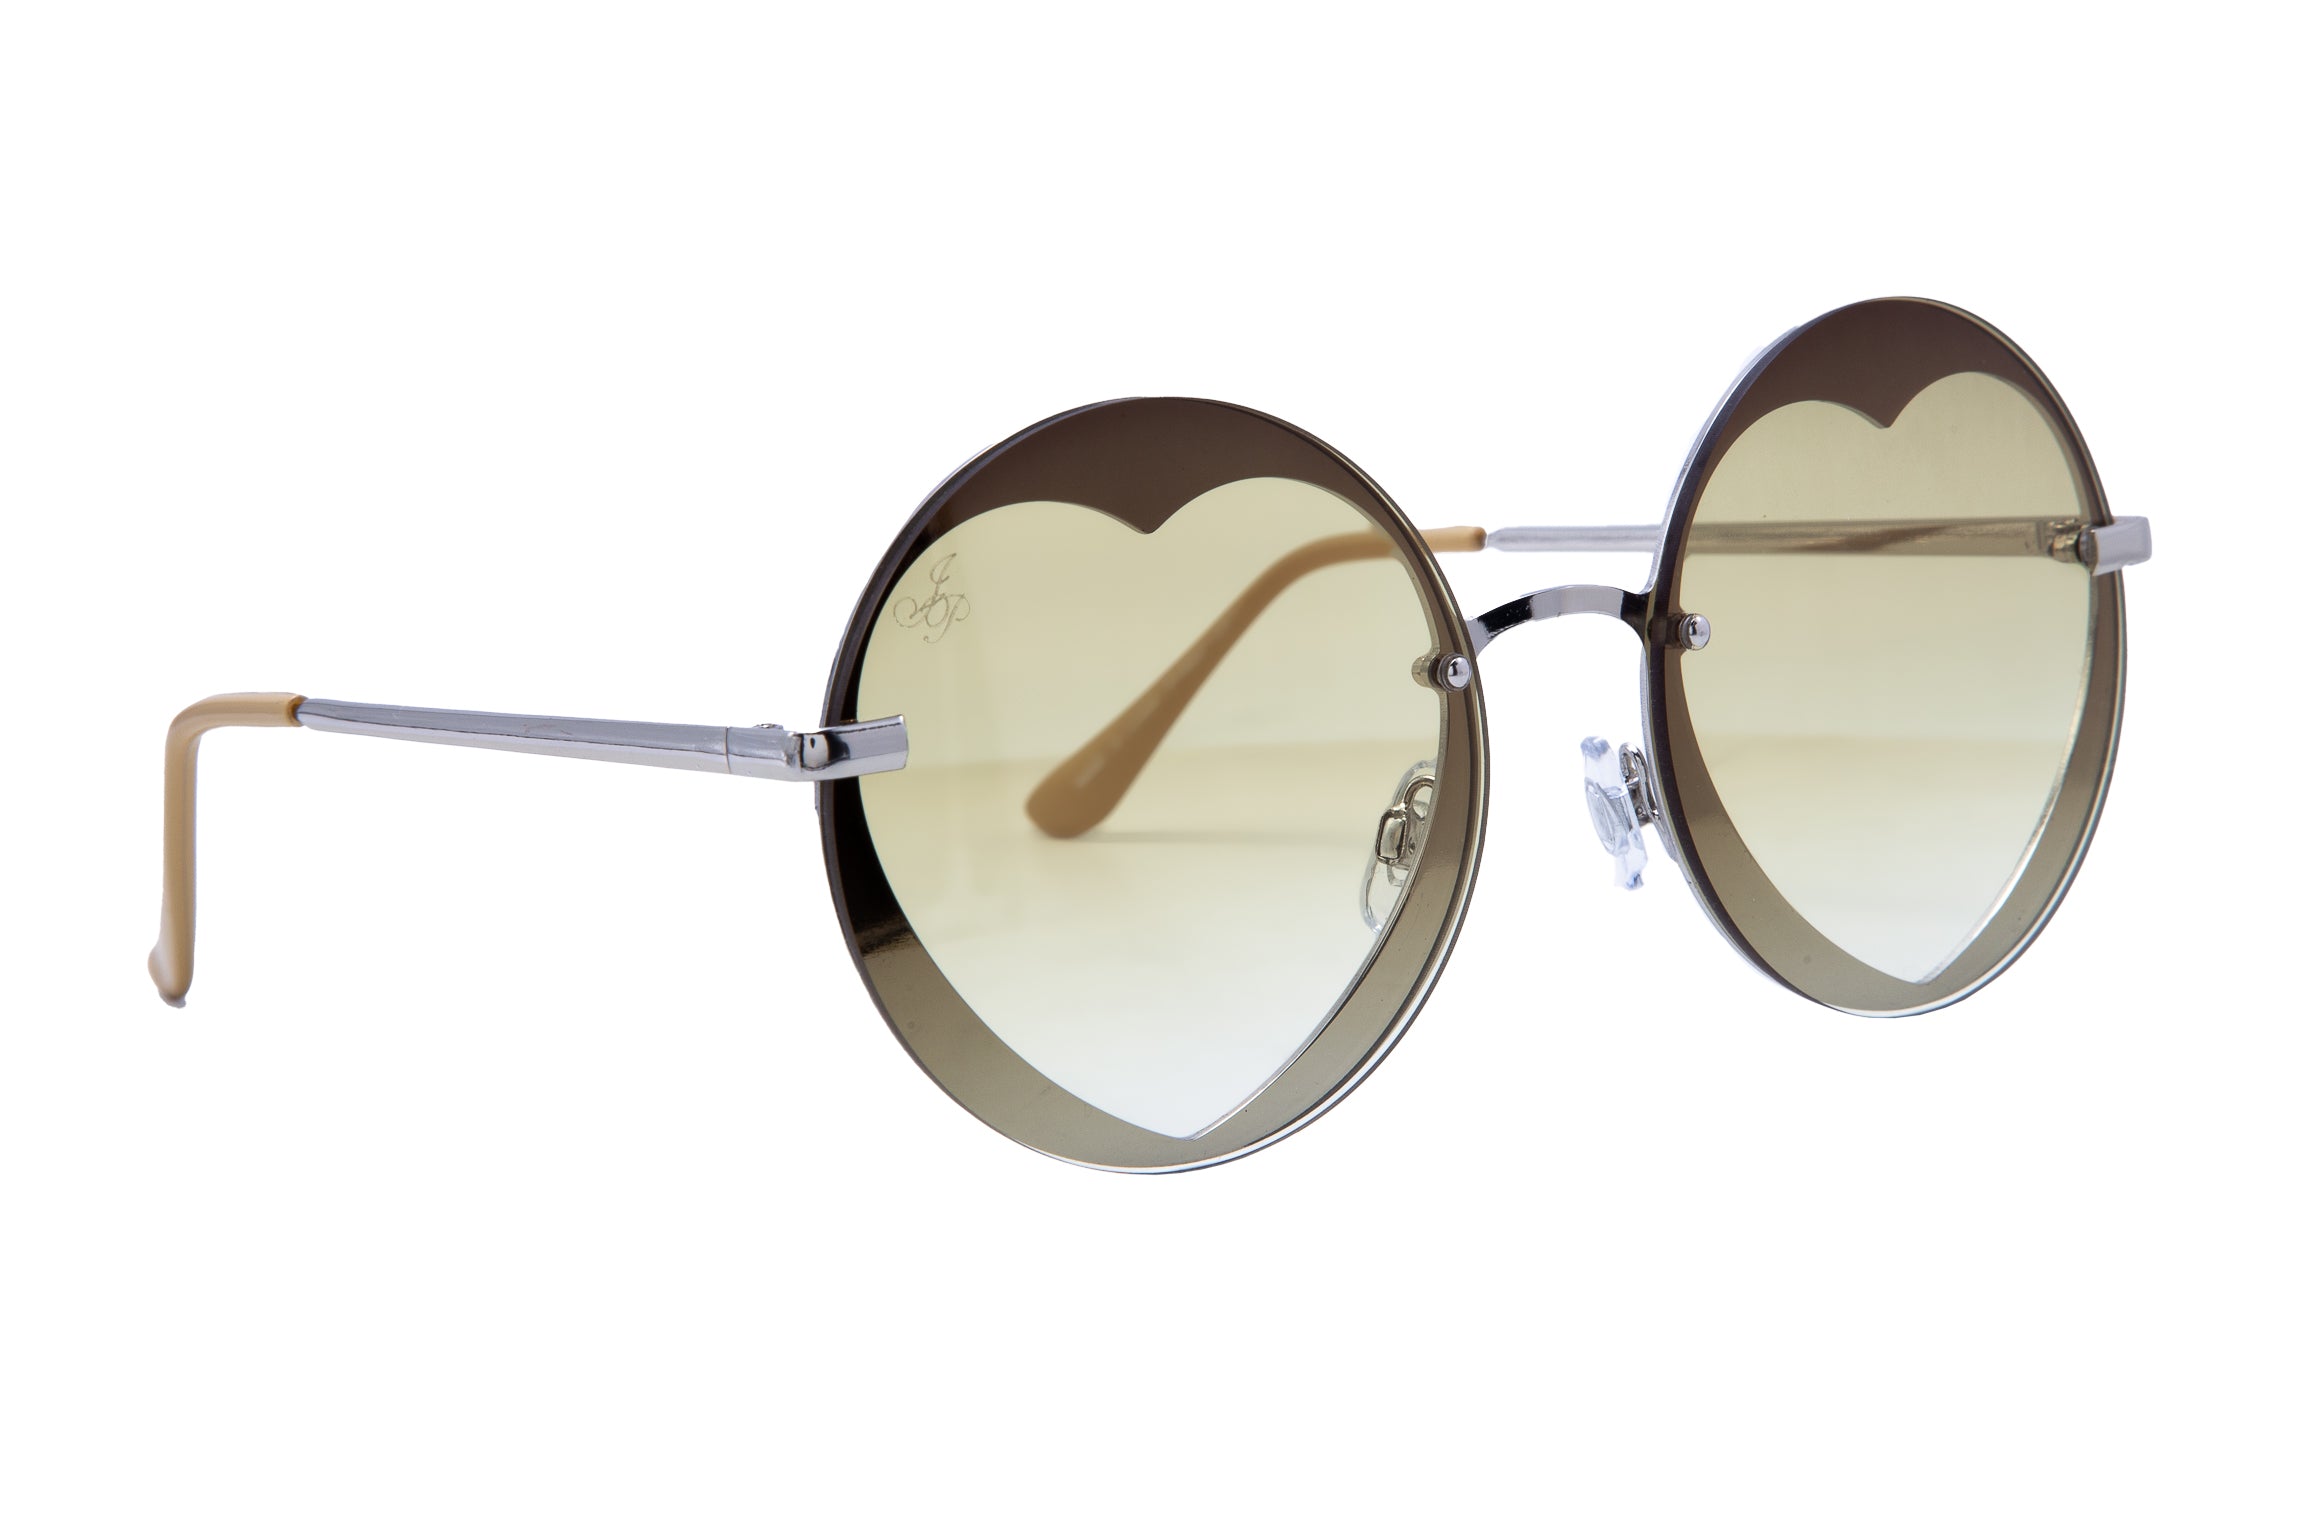 SILVER ROUND HEART FRAMES WITH YELLOW LENSES